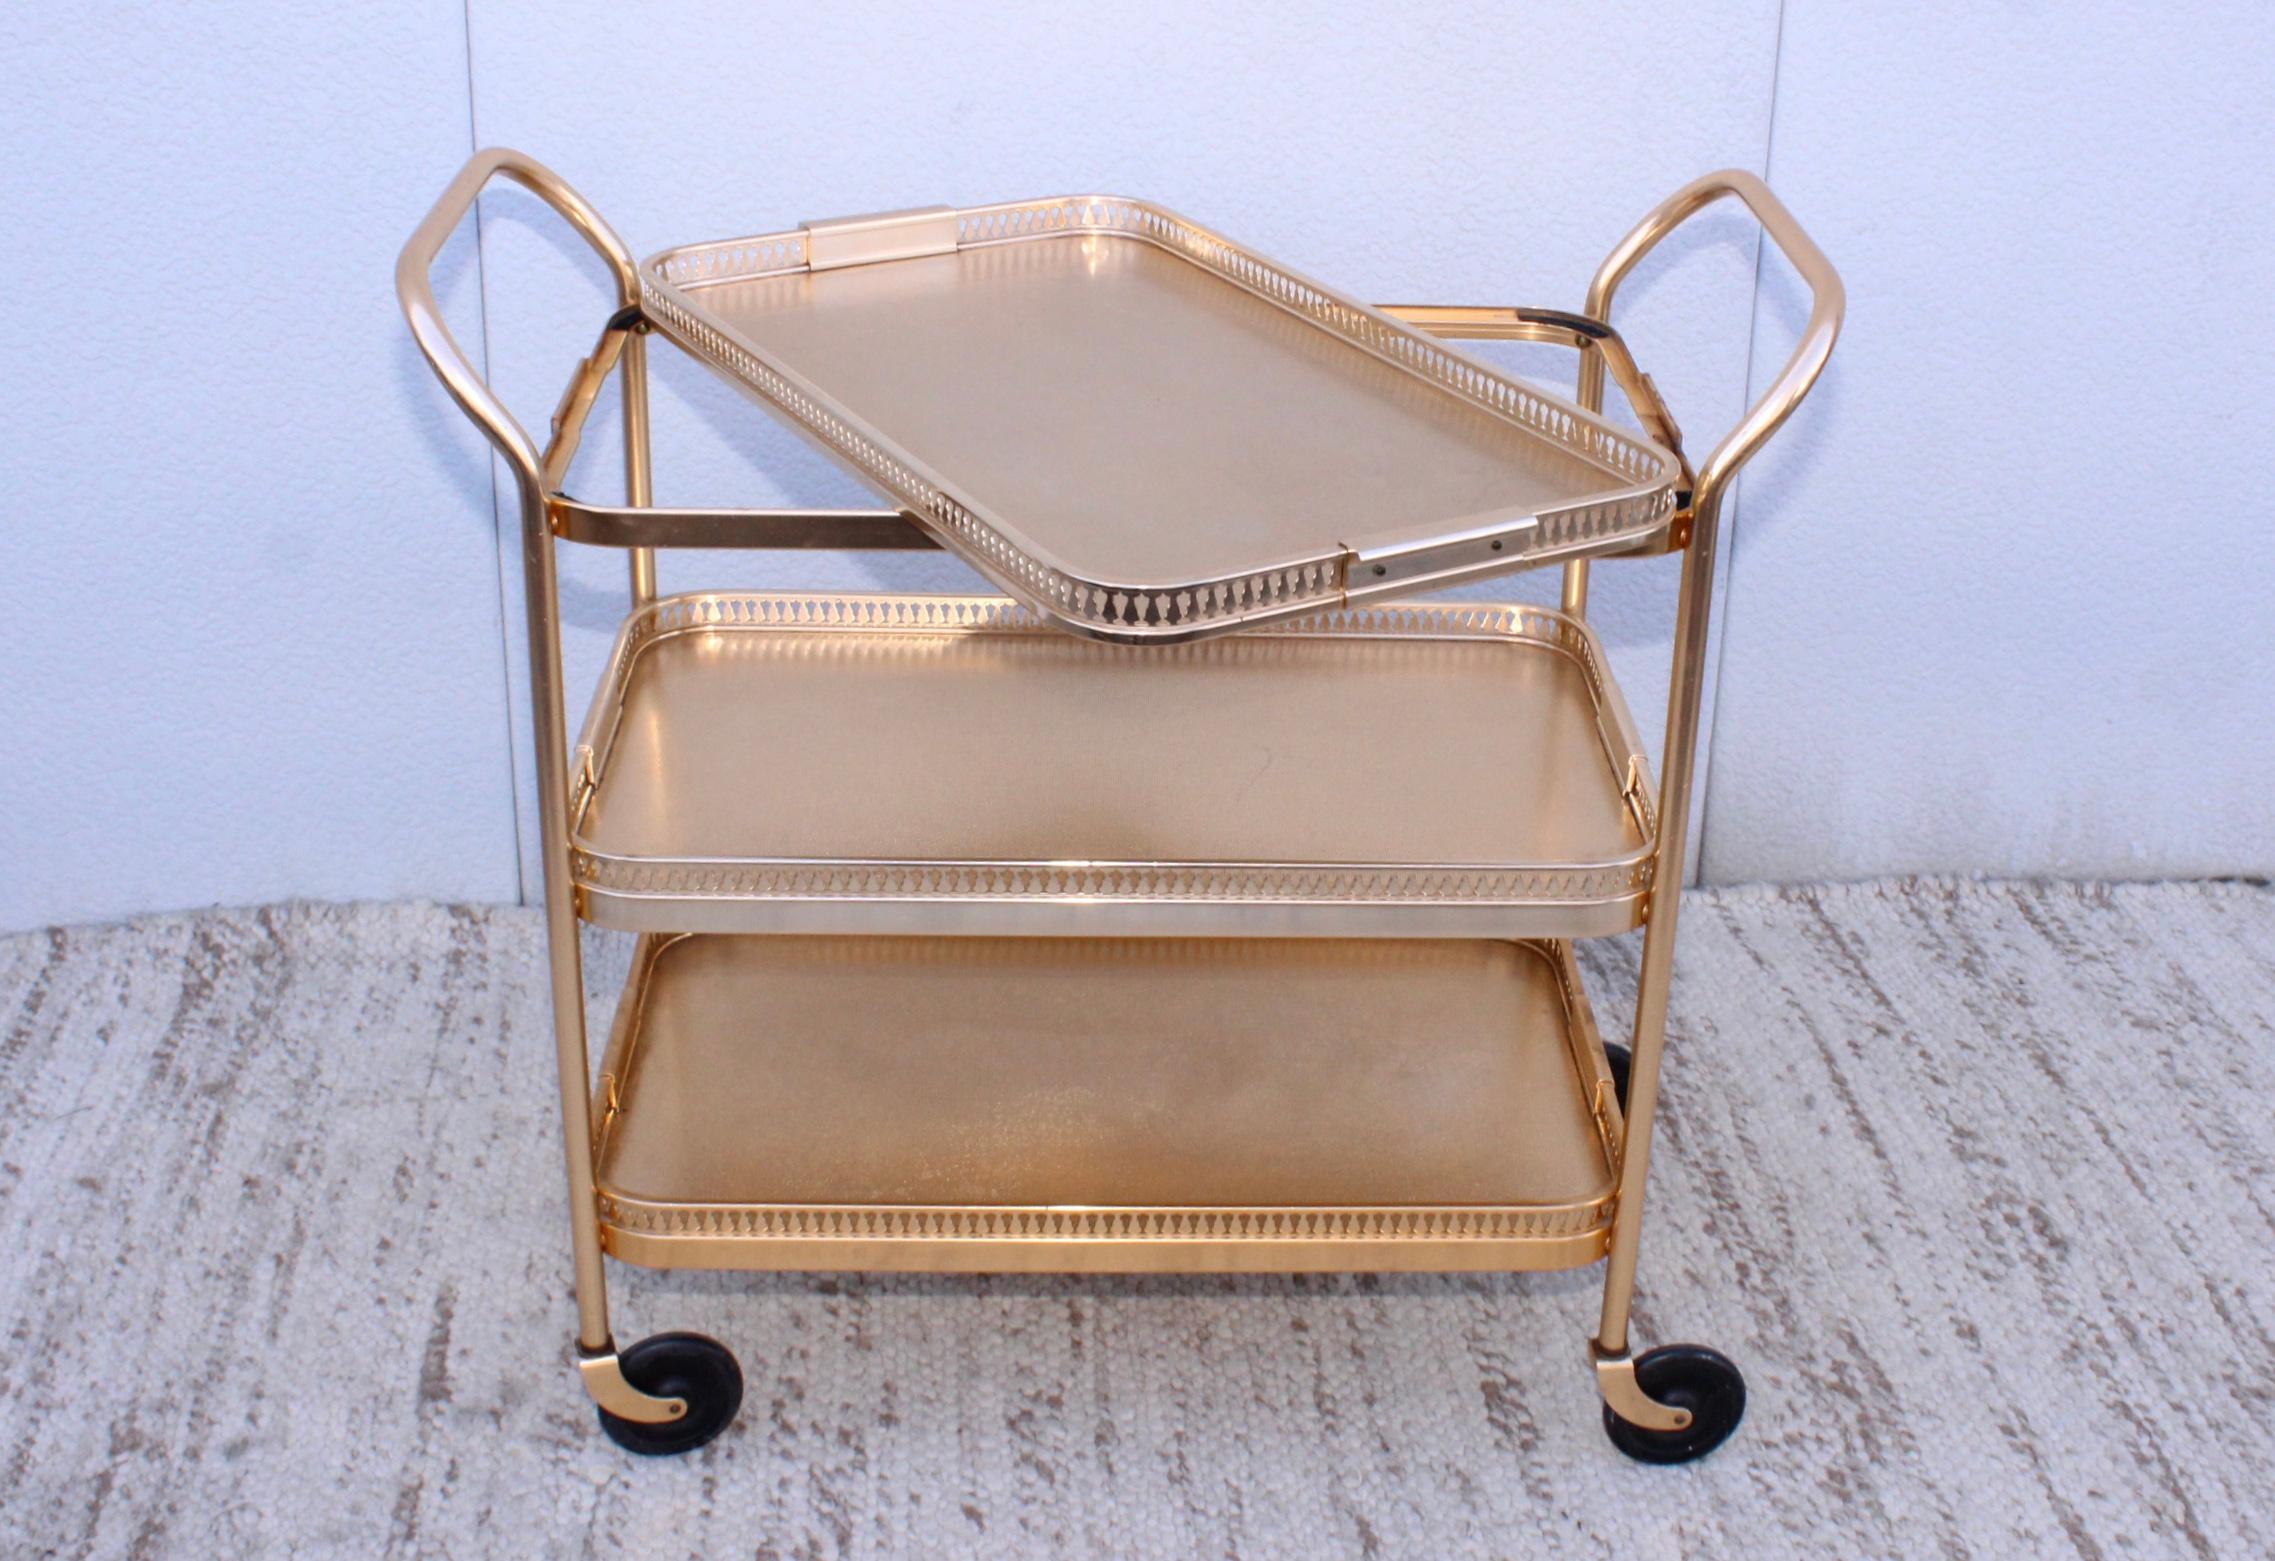 1960's Mid-Century Modern 3 Tier Bar Cart from England by Kaymet 5